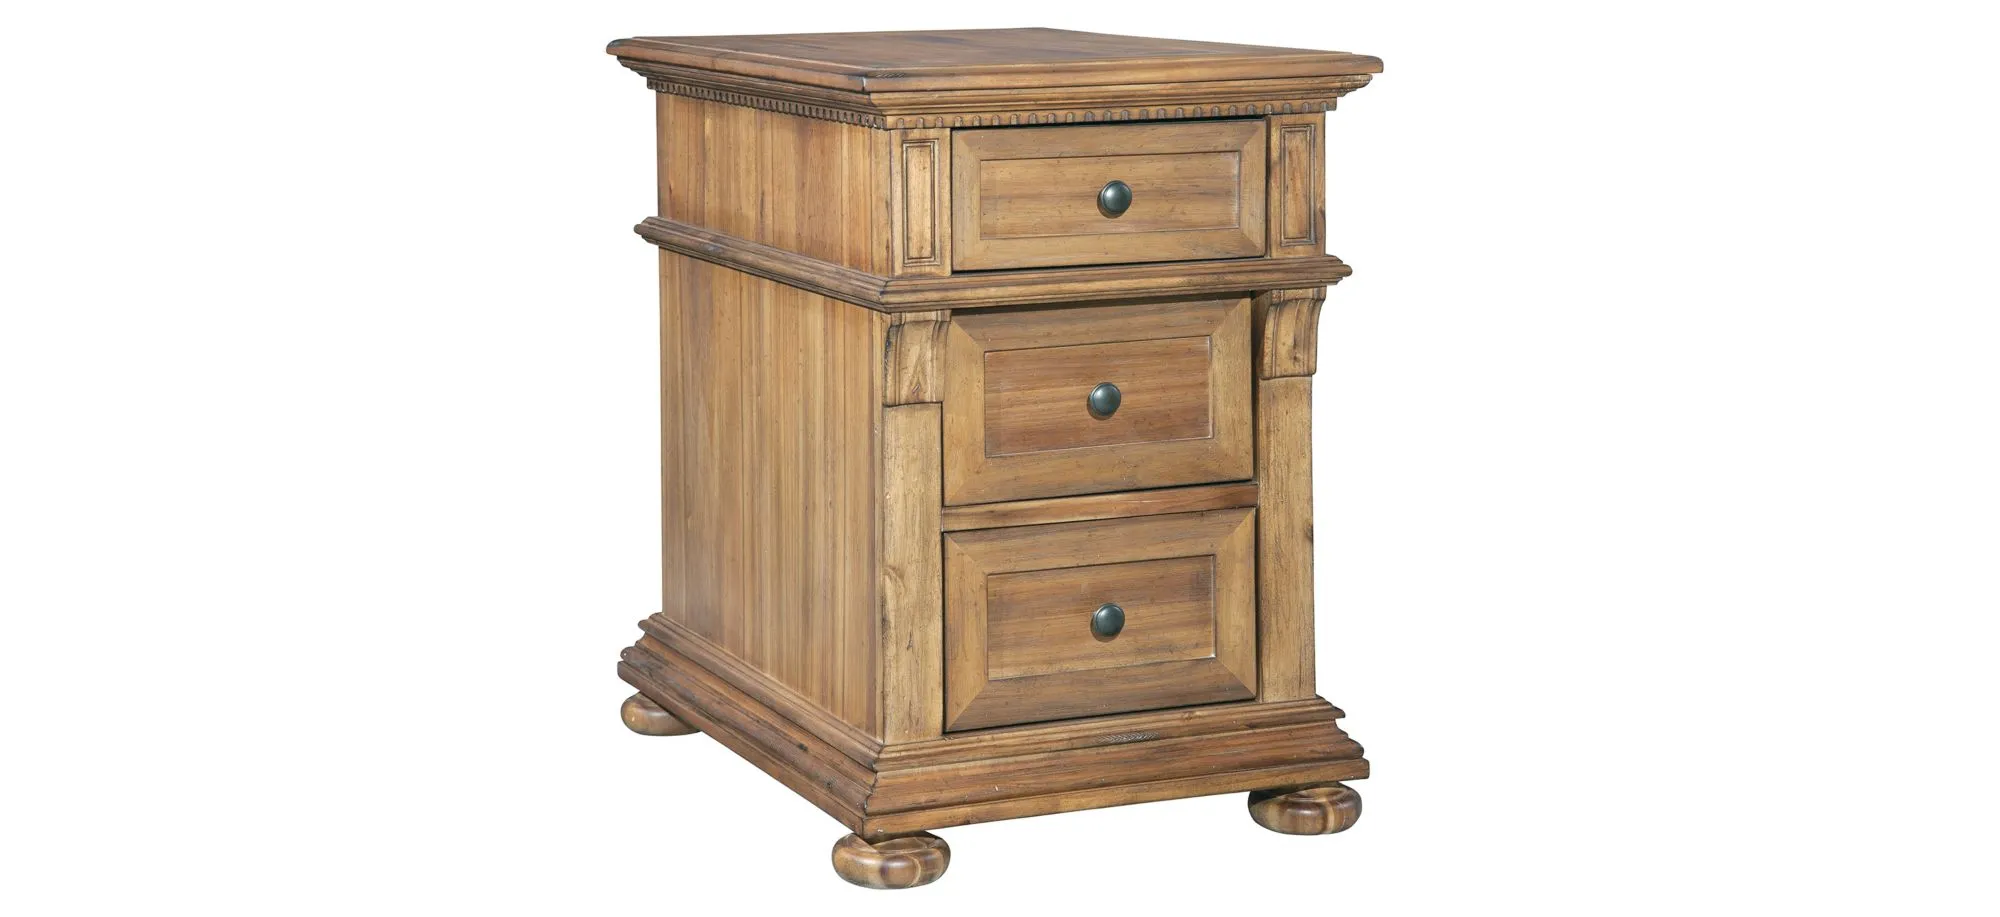 Wellington Hall Accent Chest in WELLINGTON NATURAL by Hekman Furniture Company